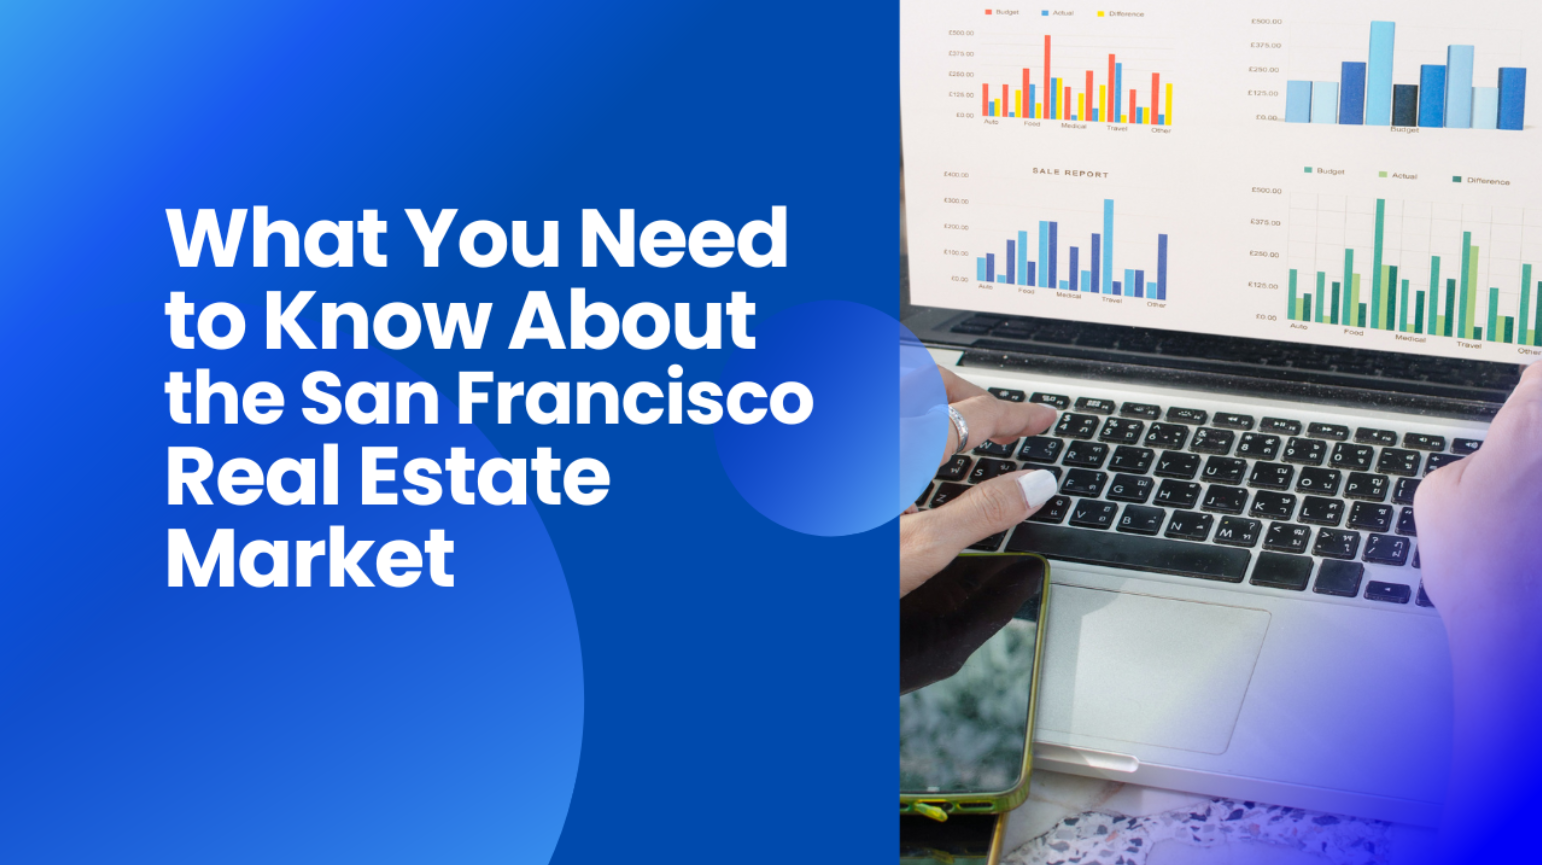 What You Need to Know About the San Francisco Real Estate Market